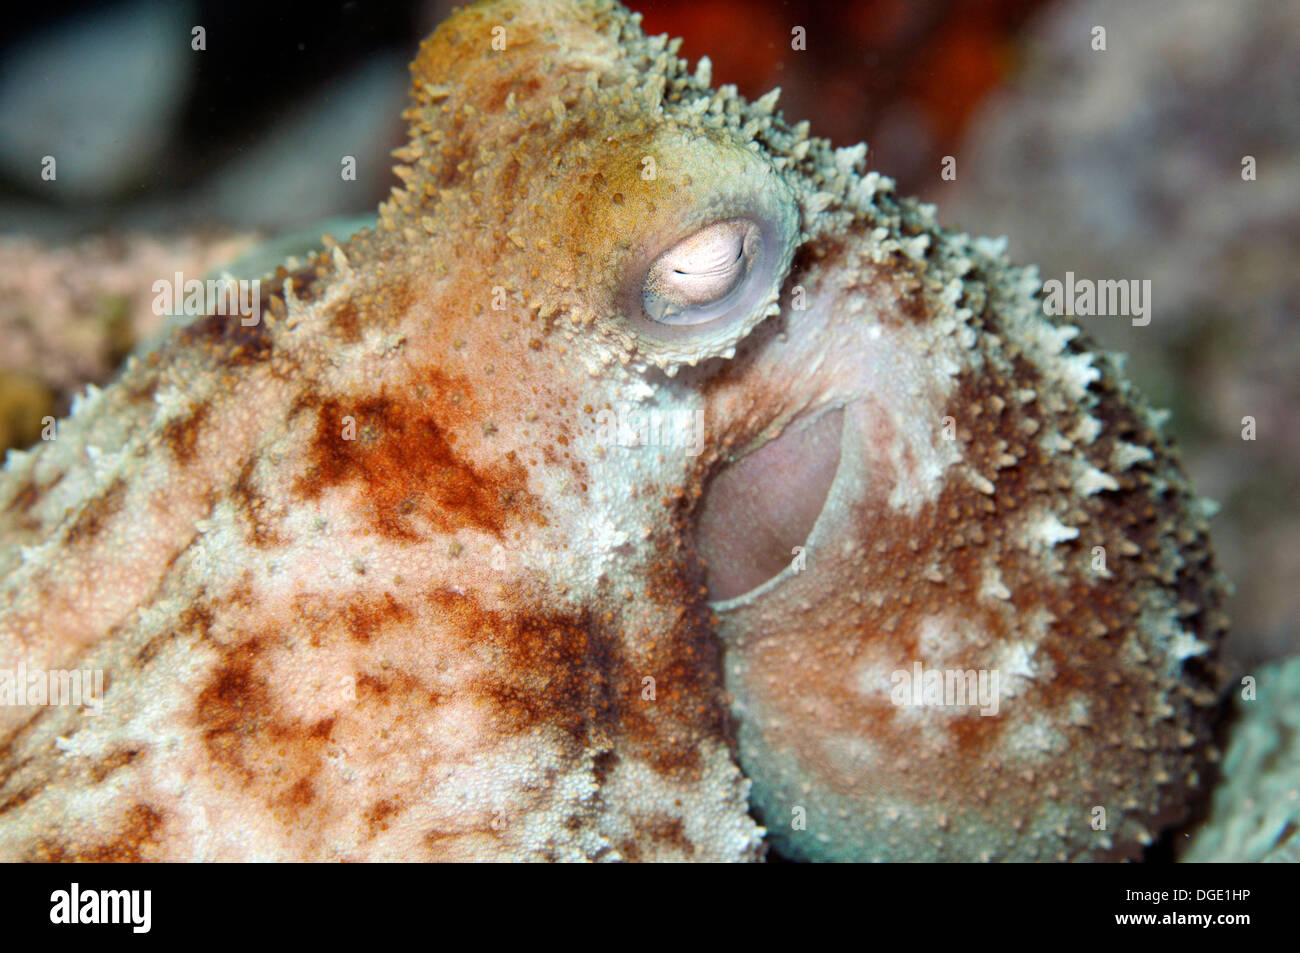 Octopus, Octopus briareus, in a night dive at the Paradise Reef, Cozumel, Mexico, Caribbean Sea Stock Photo